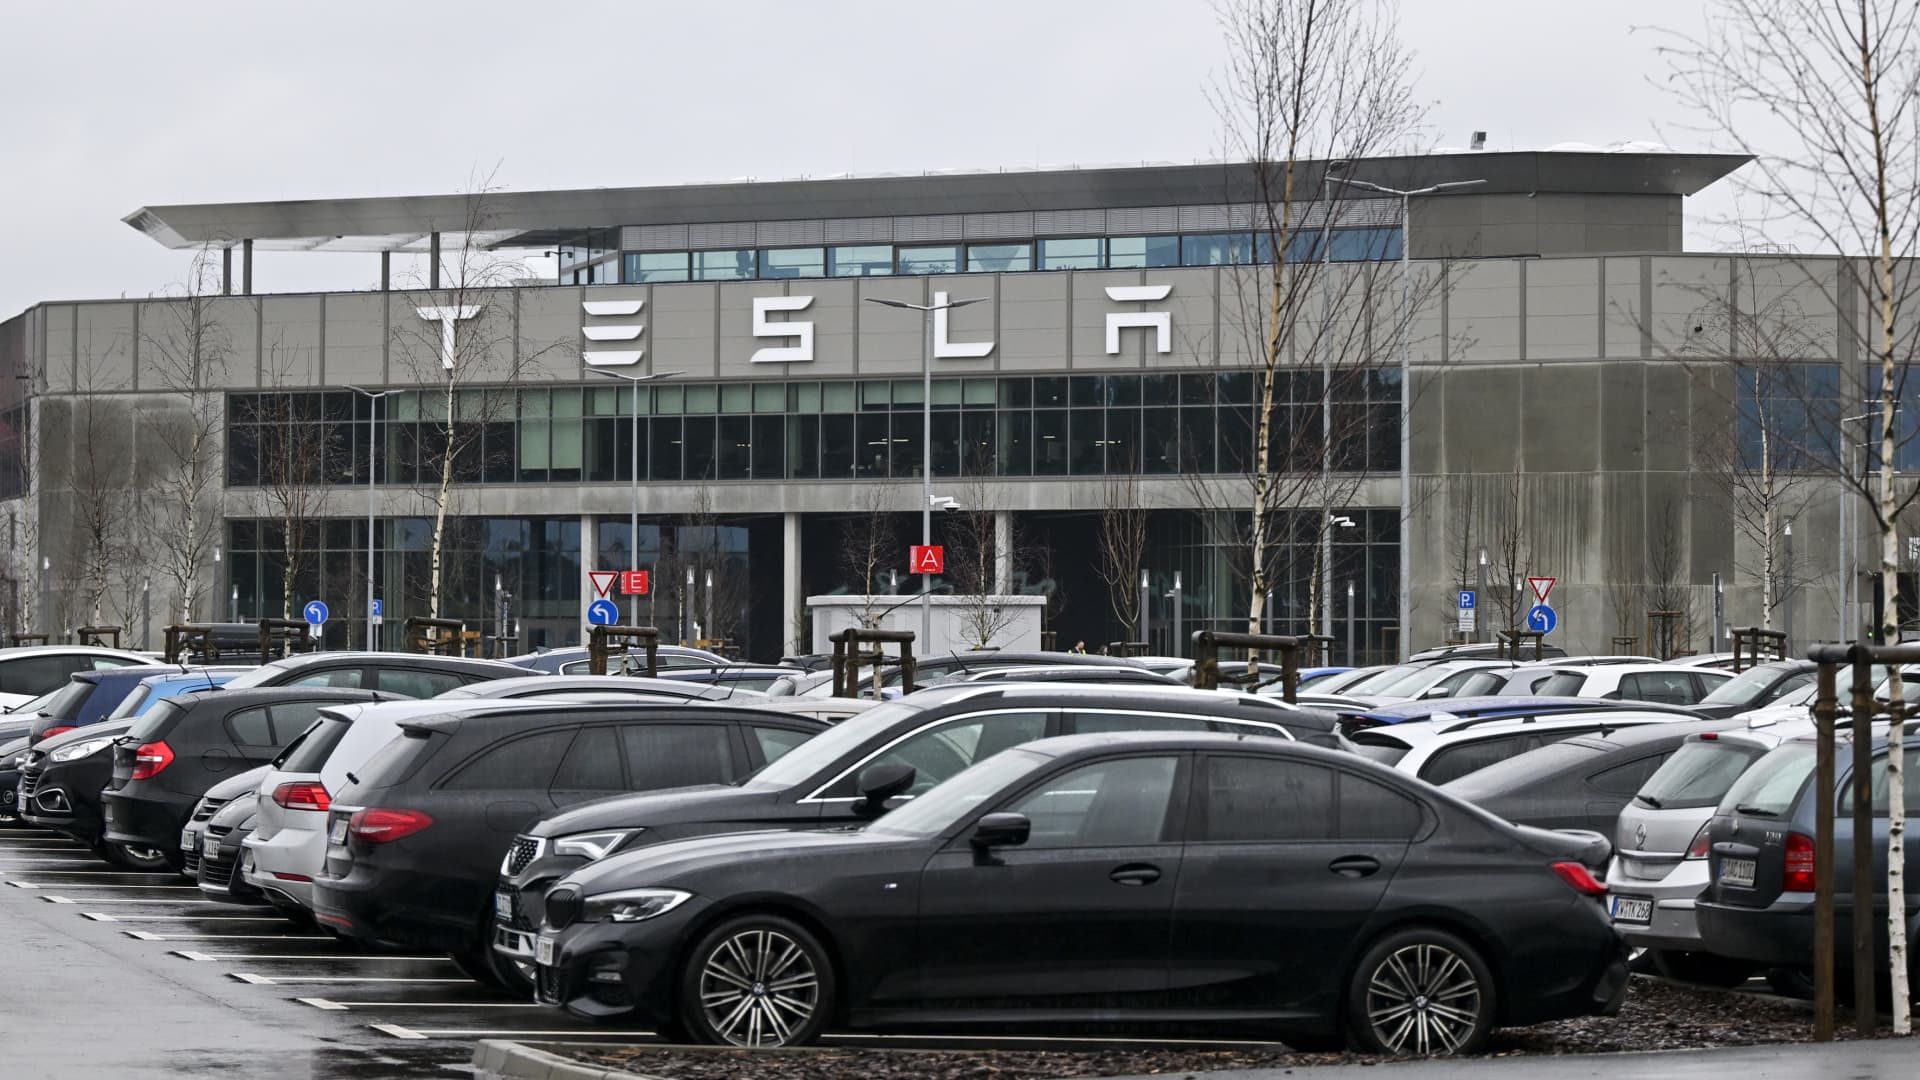 Tesla shares lunge 4.5% after suspected arson attack halts manufacturing at Berlin Gigafactory